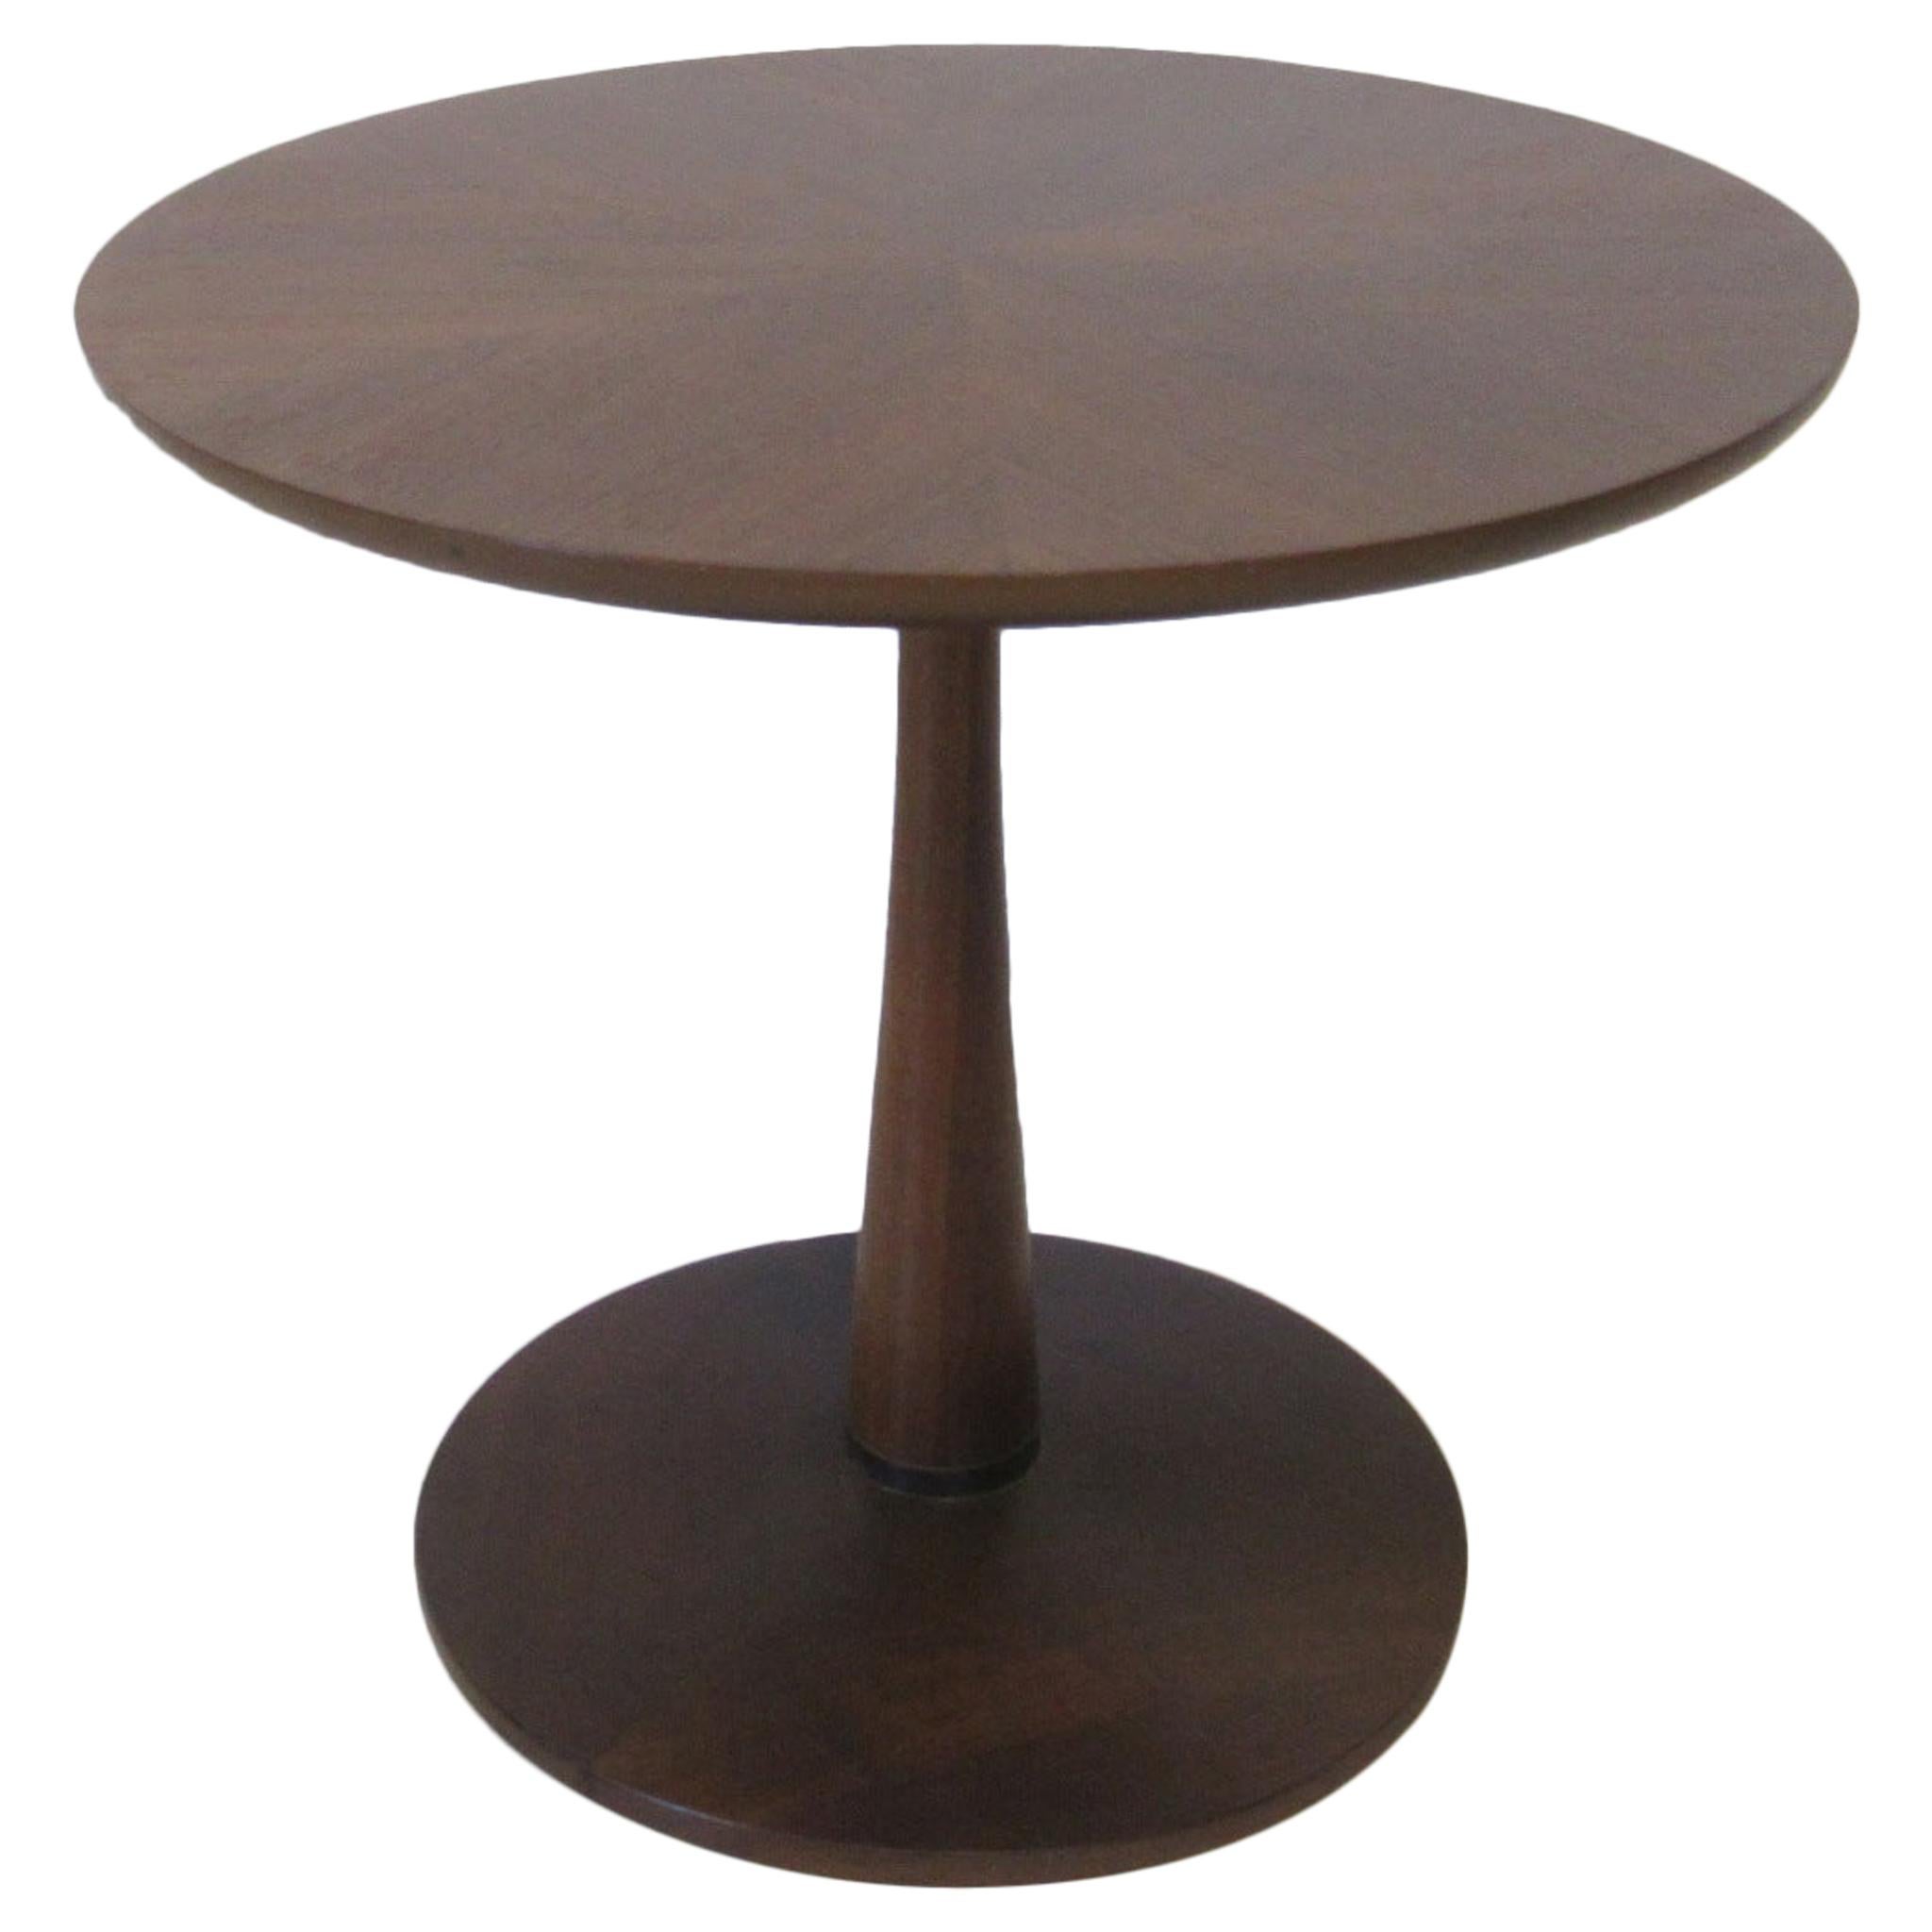 Walnut Pedestal Based Side Table by Drexel for the Declaration Collection